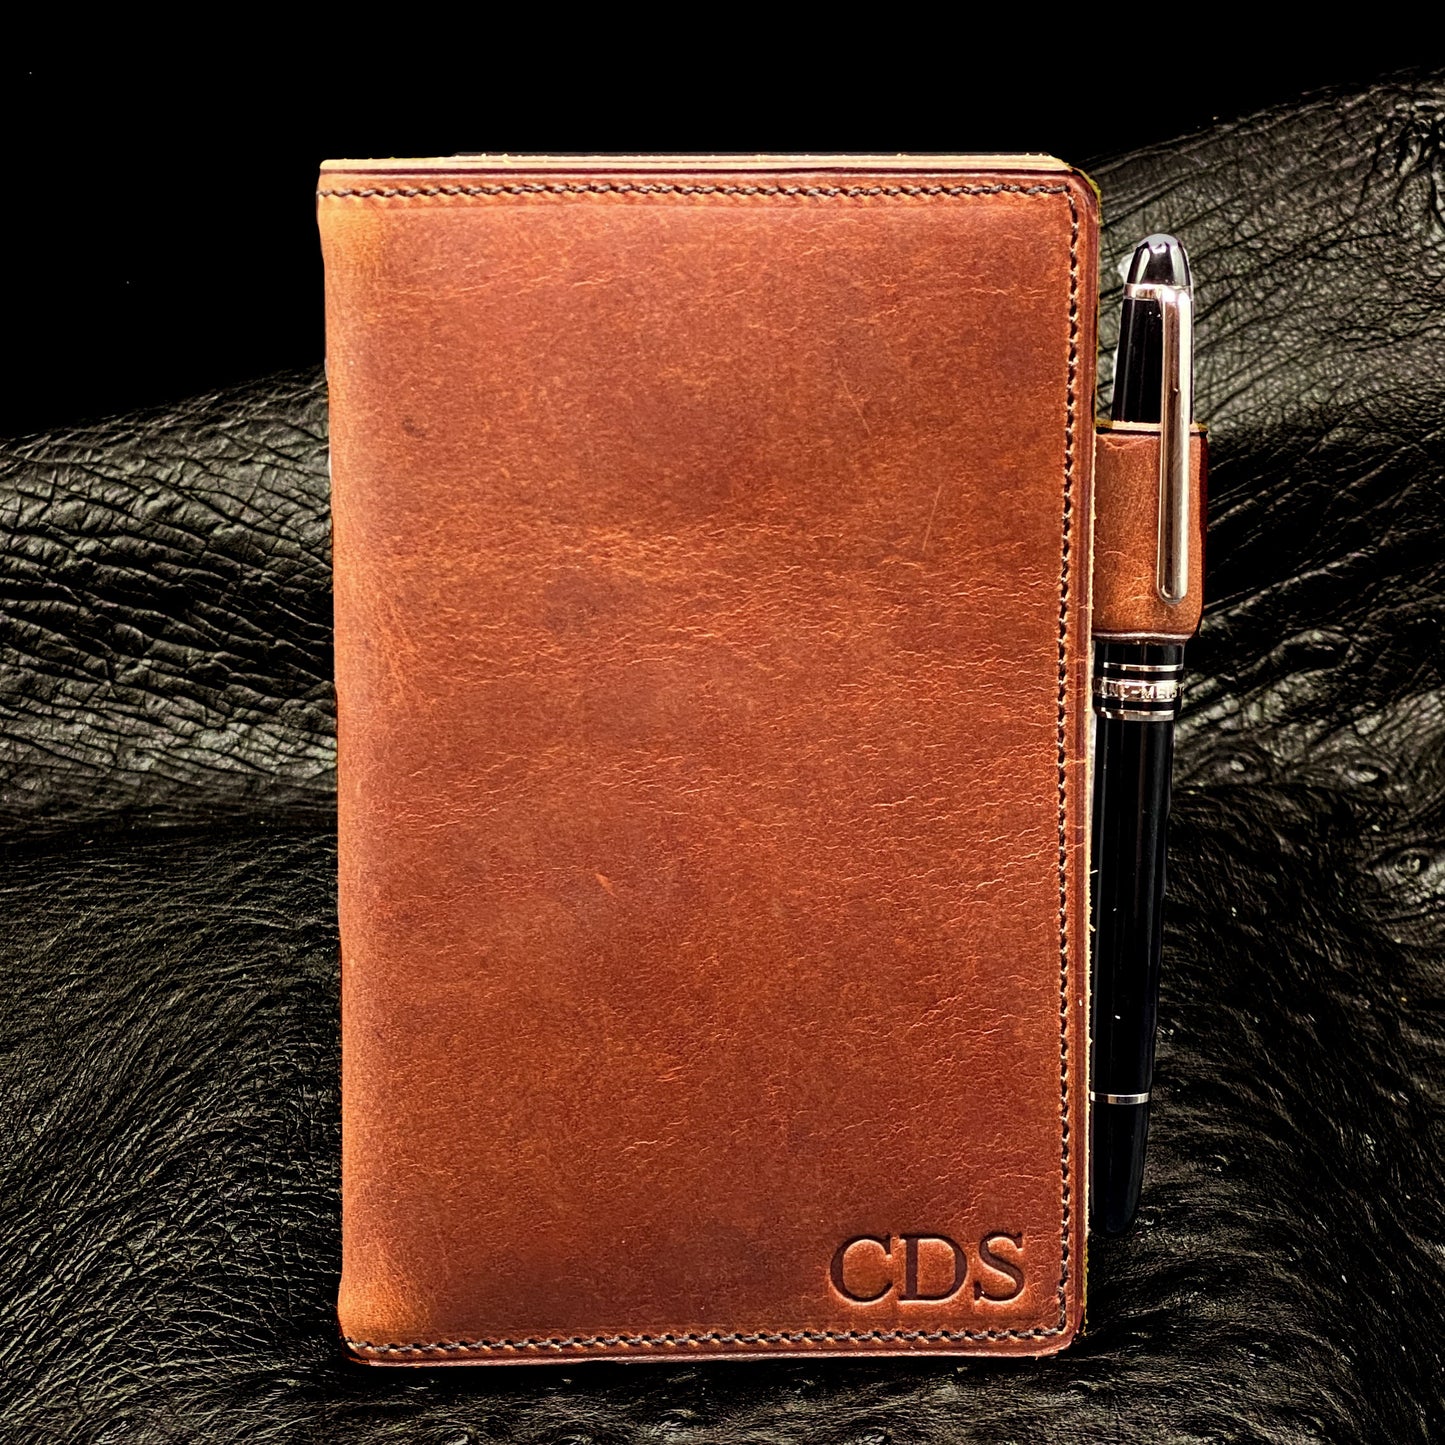 Custom Handmade Field Notes Journal Covers in Cognac Horween Leather | Handmade in Houston | Custom Leather and Pen